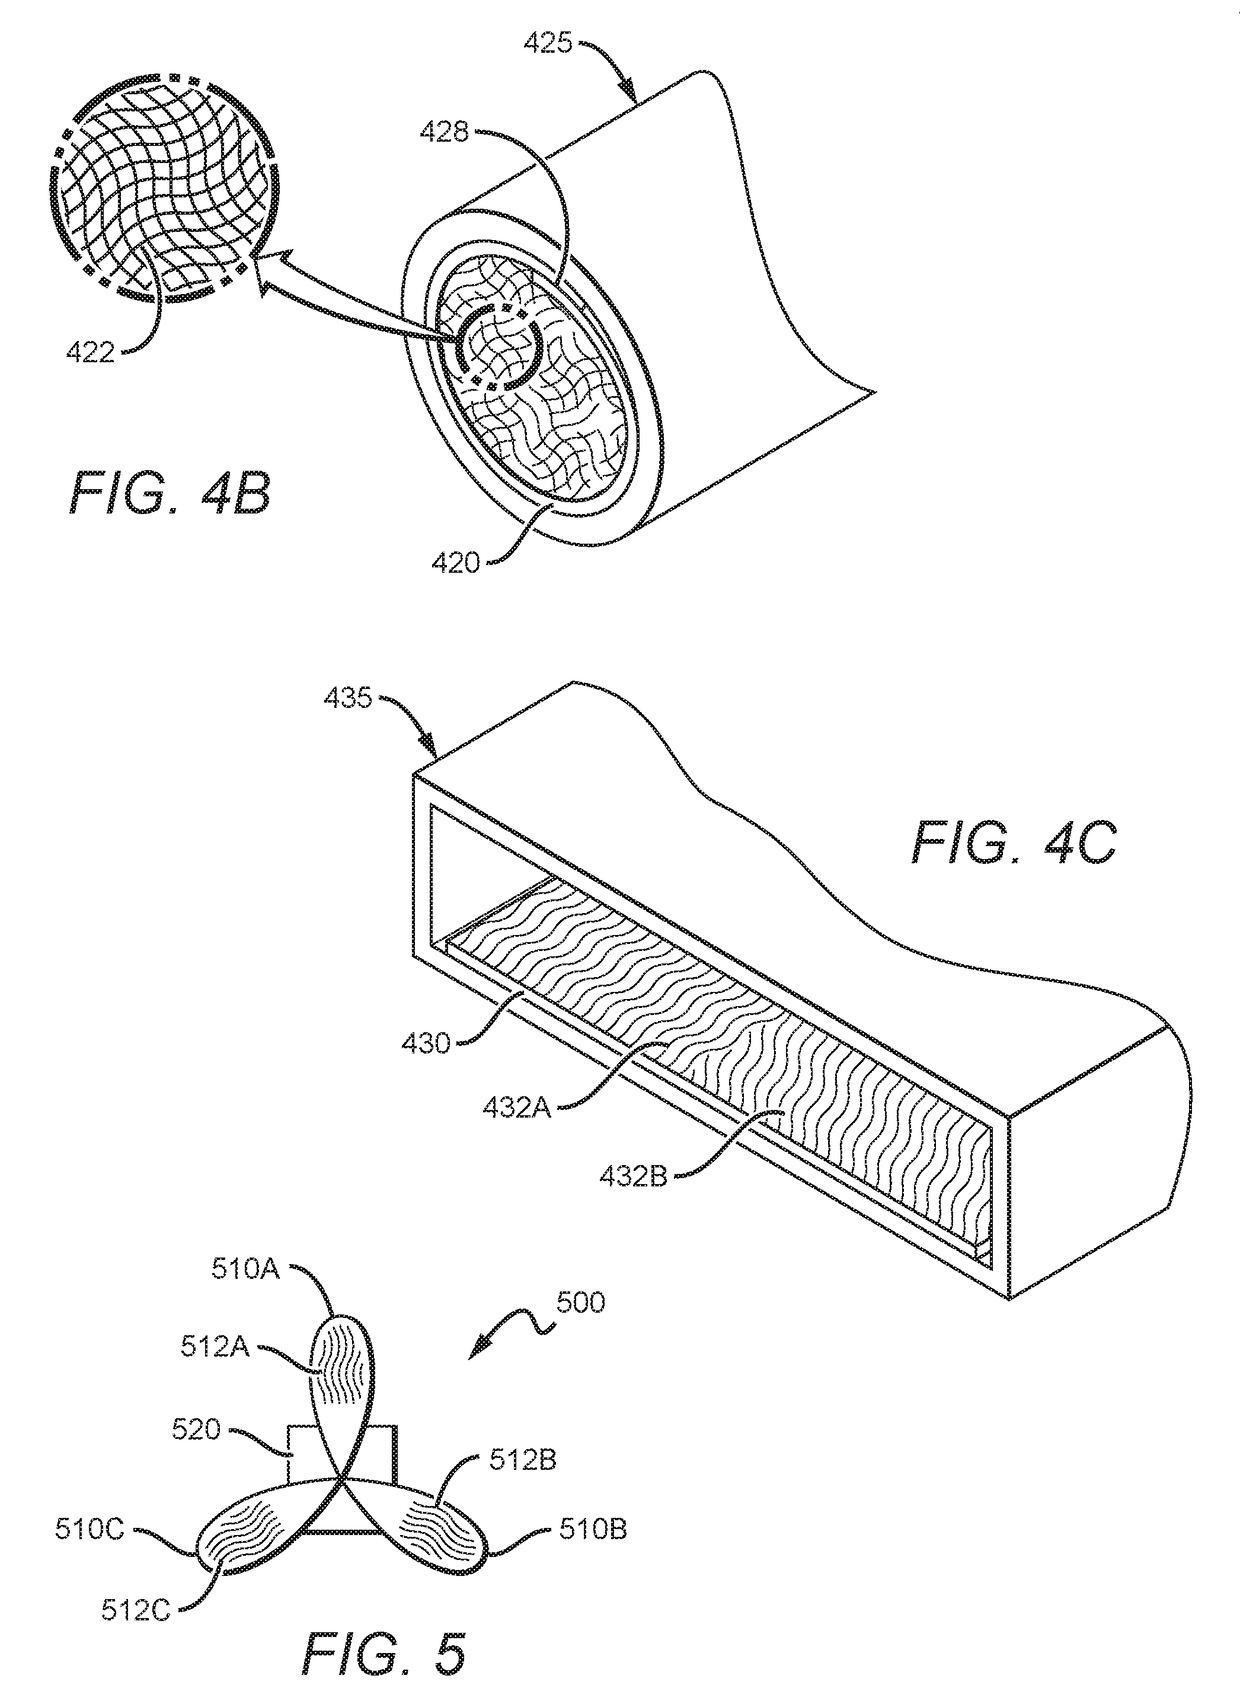 Methods and apparatus for improving sound within an acoustical boundary layer